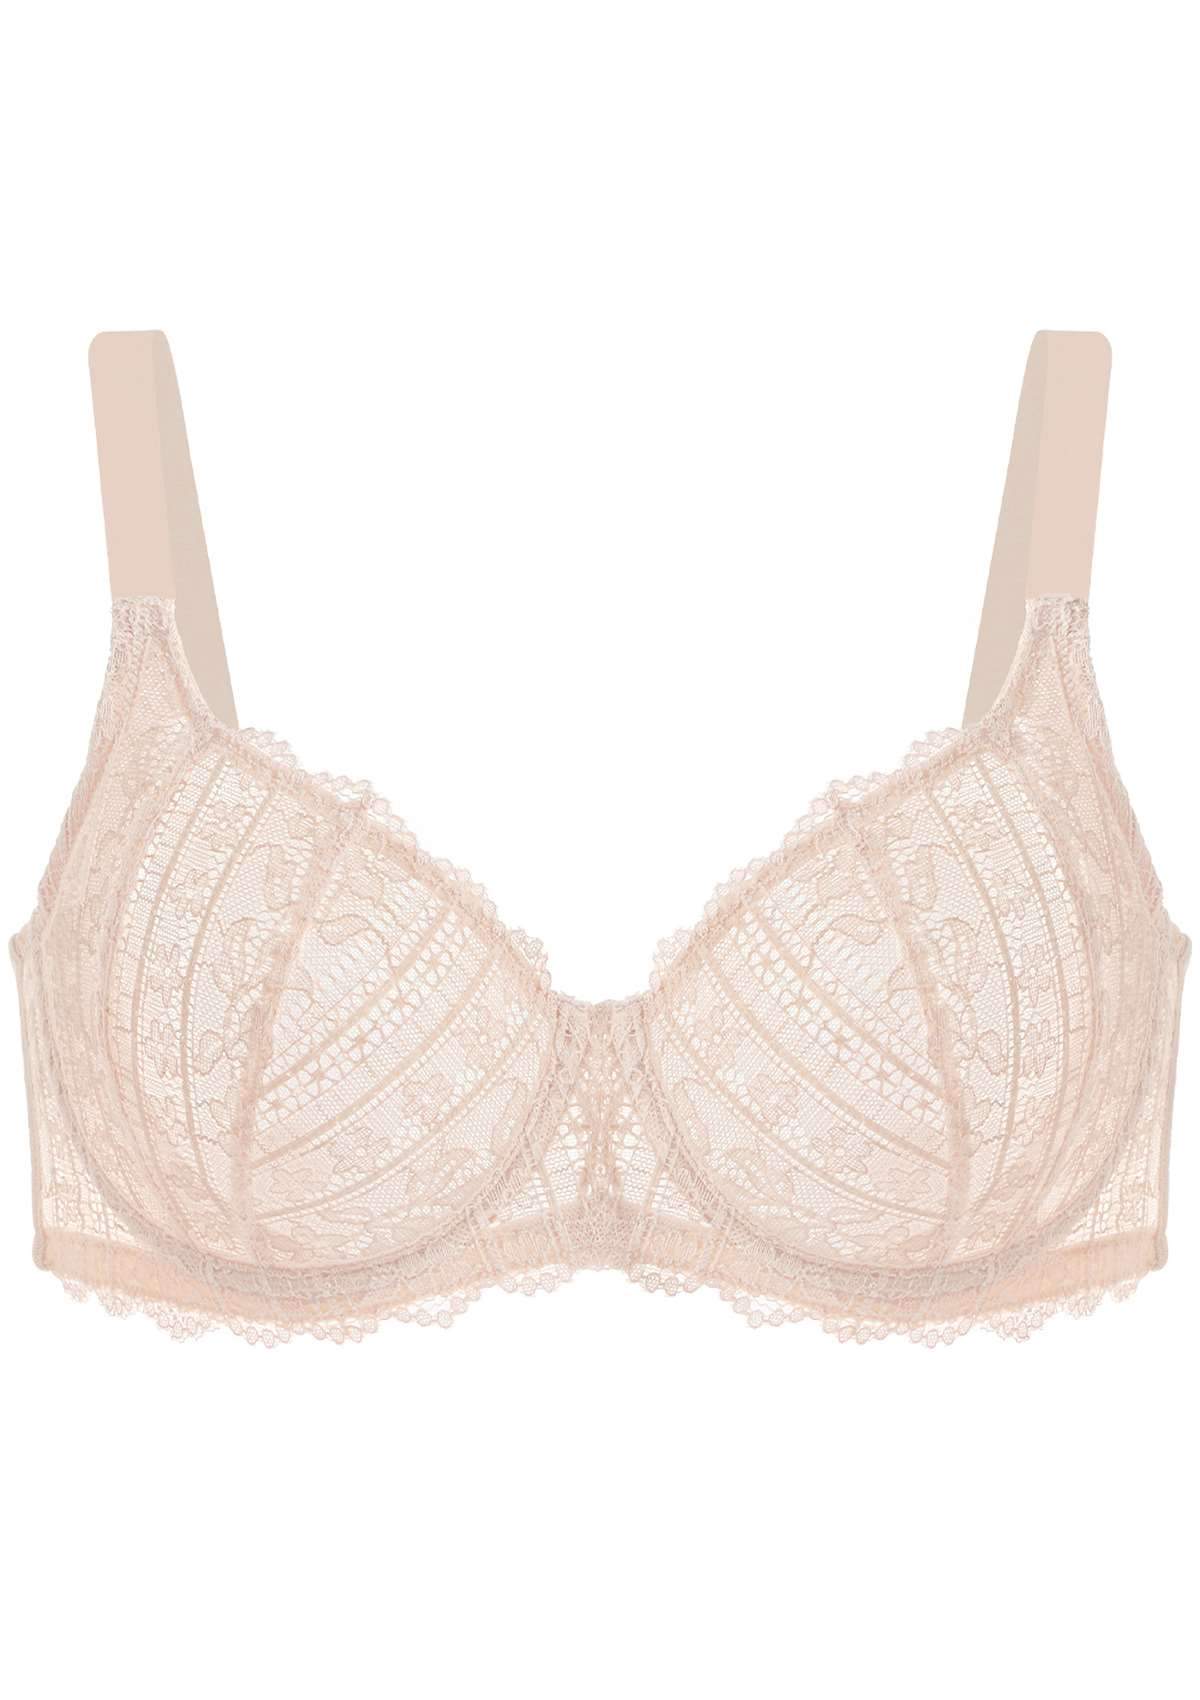 HSIA Vertical Lace Up Bra: Plus Size Back Smoothing Bra - Light Pink / 34 / DDD/F